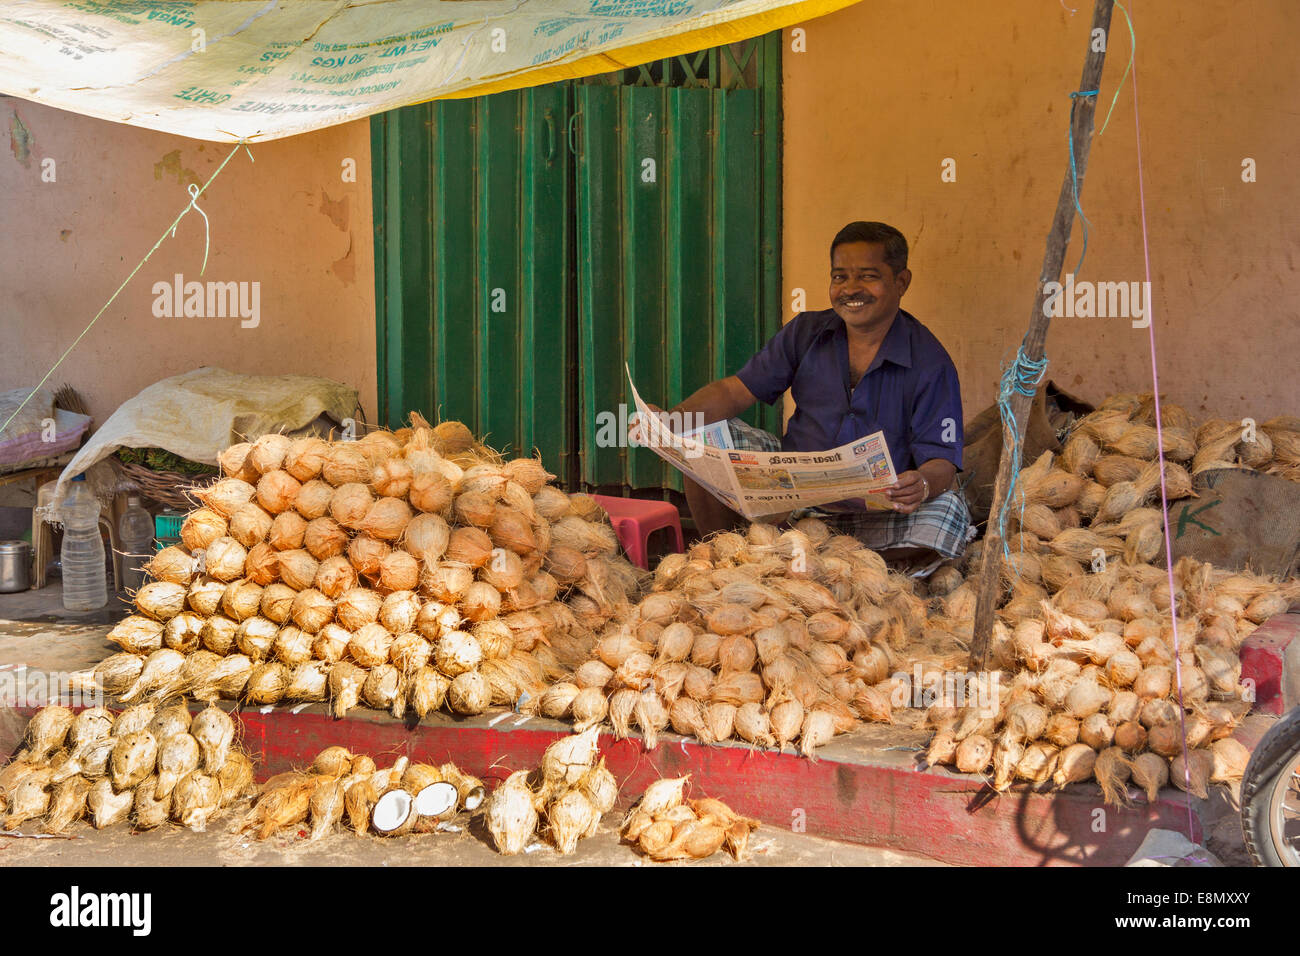 SOUTHERN INDIA COCONUT SELLER READING HIS NEWSPAPER IN A COVERED STREET STALL ON A PAVEMENT Stock Photo